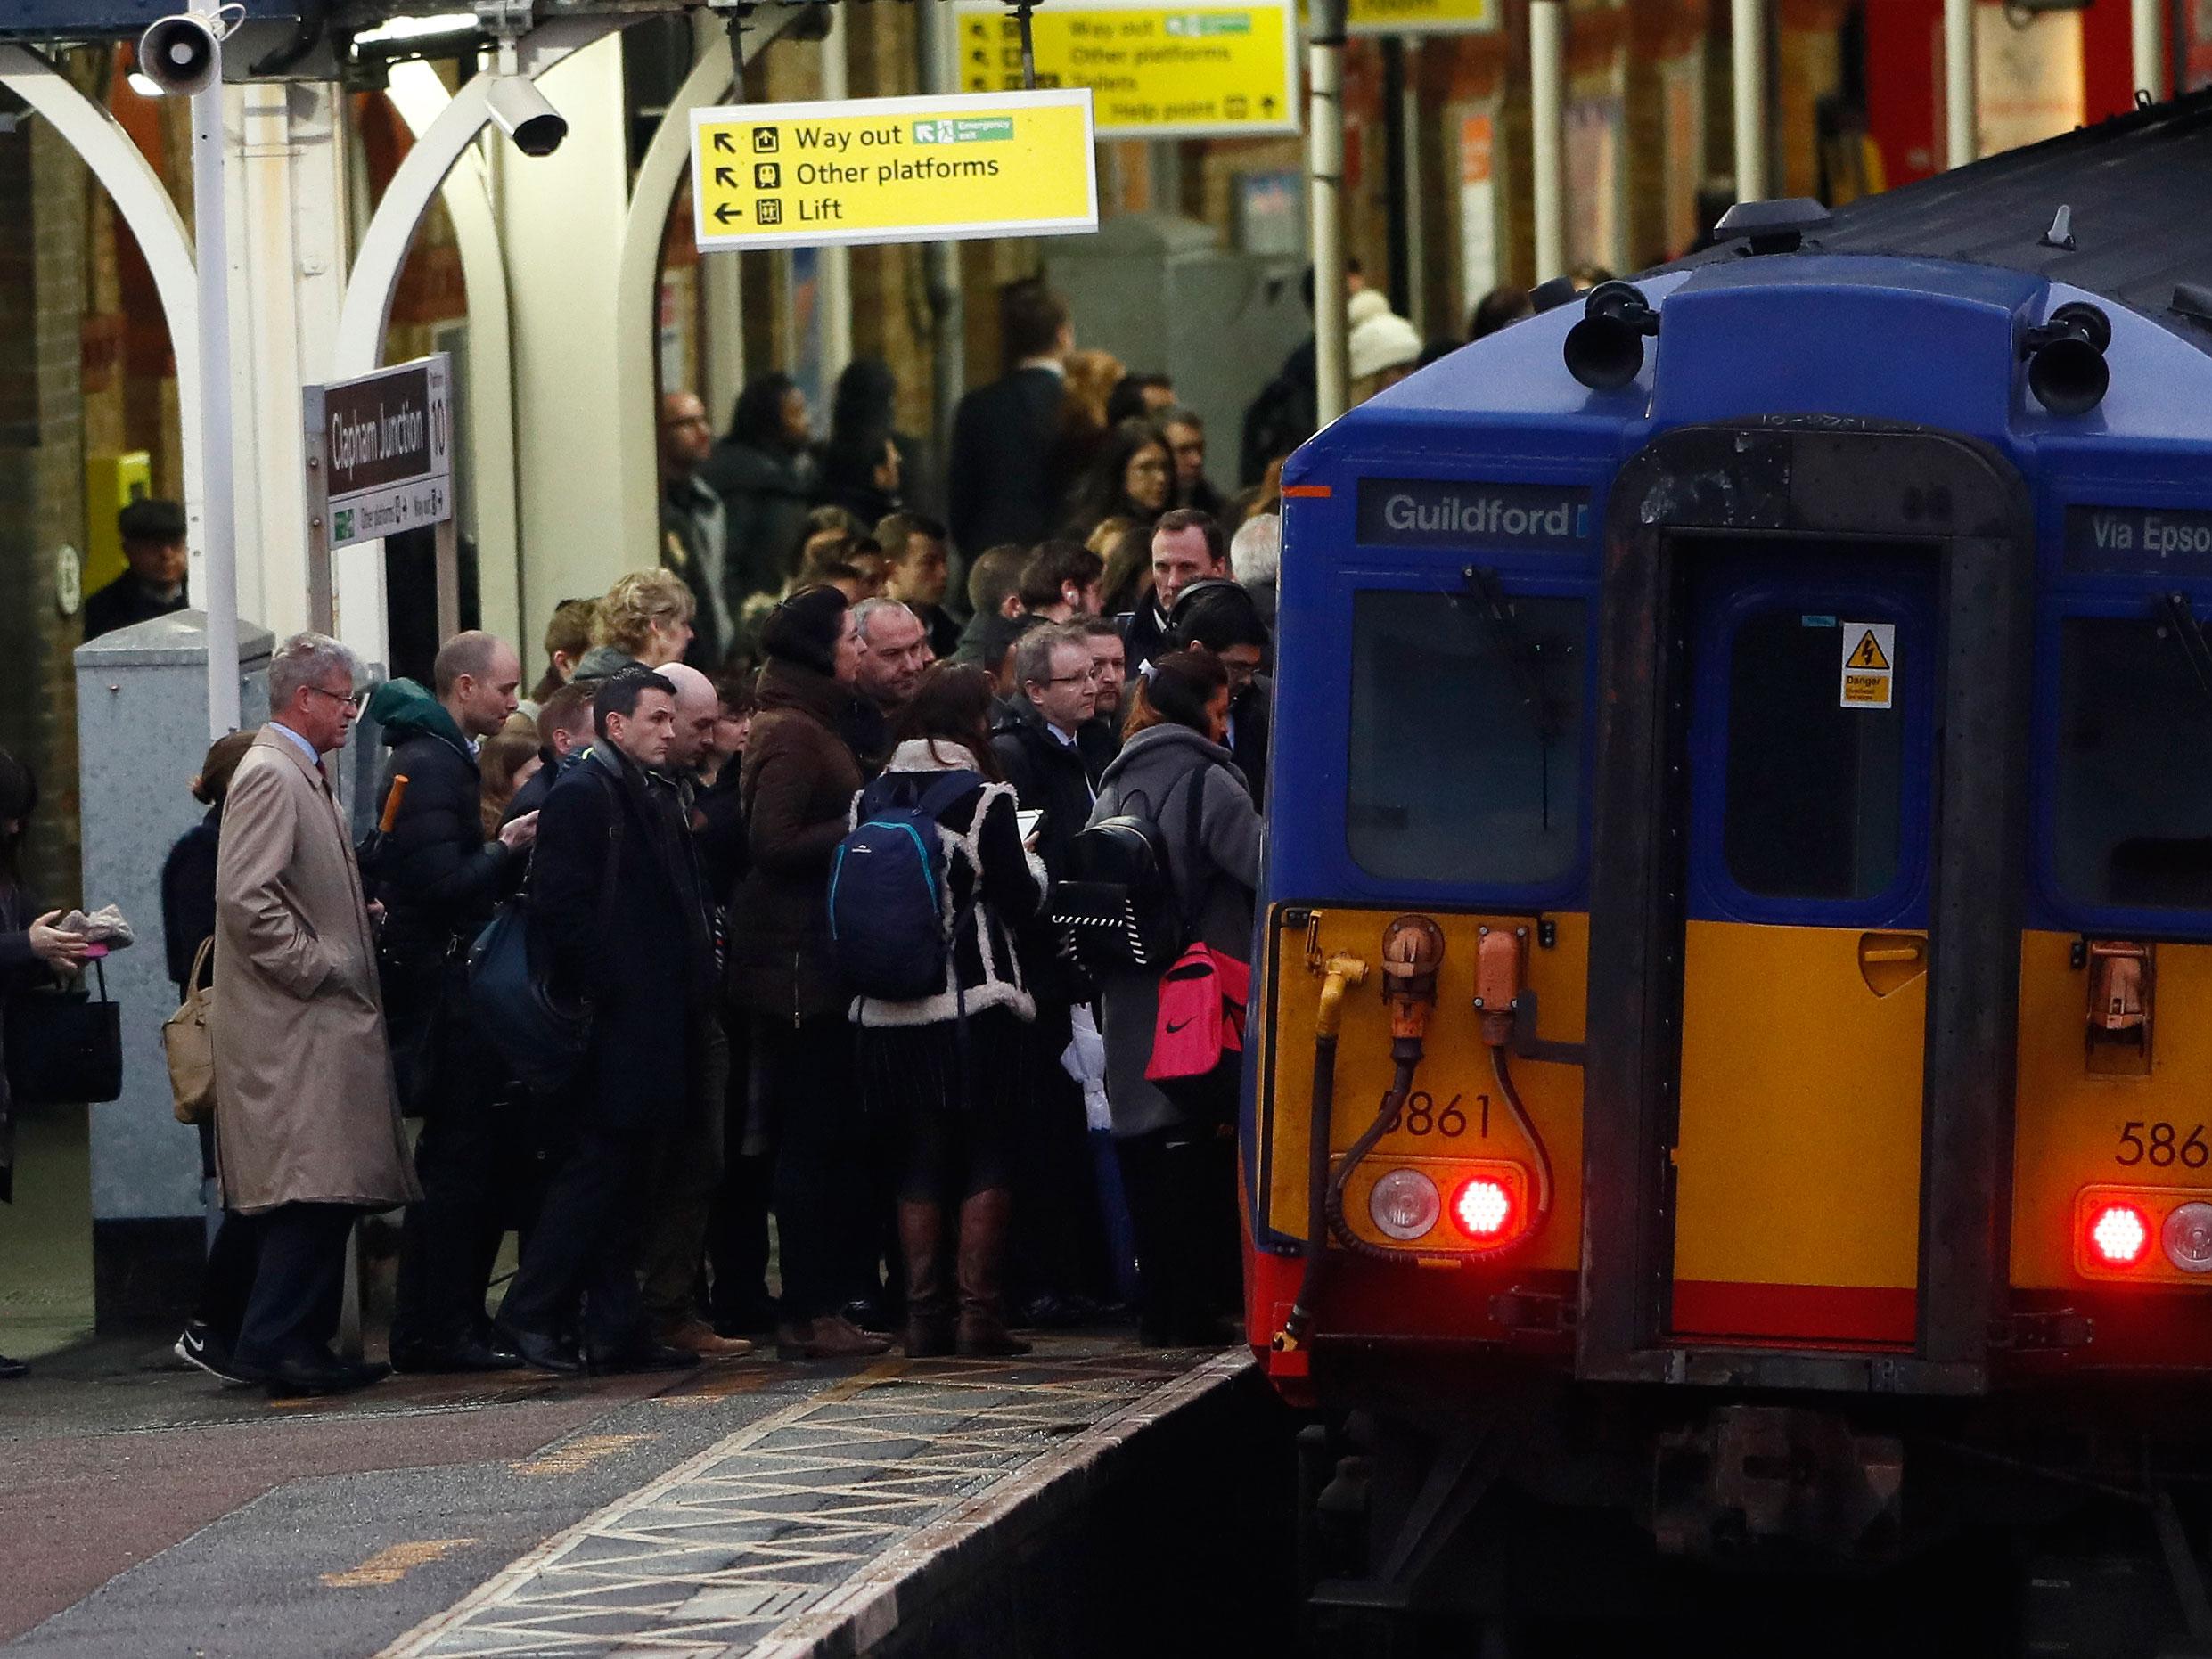 The effects of the strike will continue until the last trains in the early hours of the morning